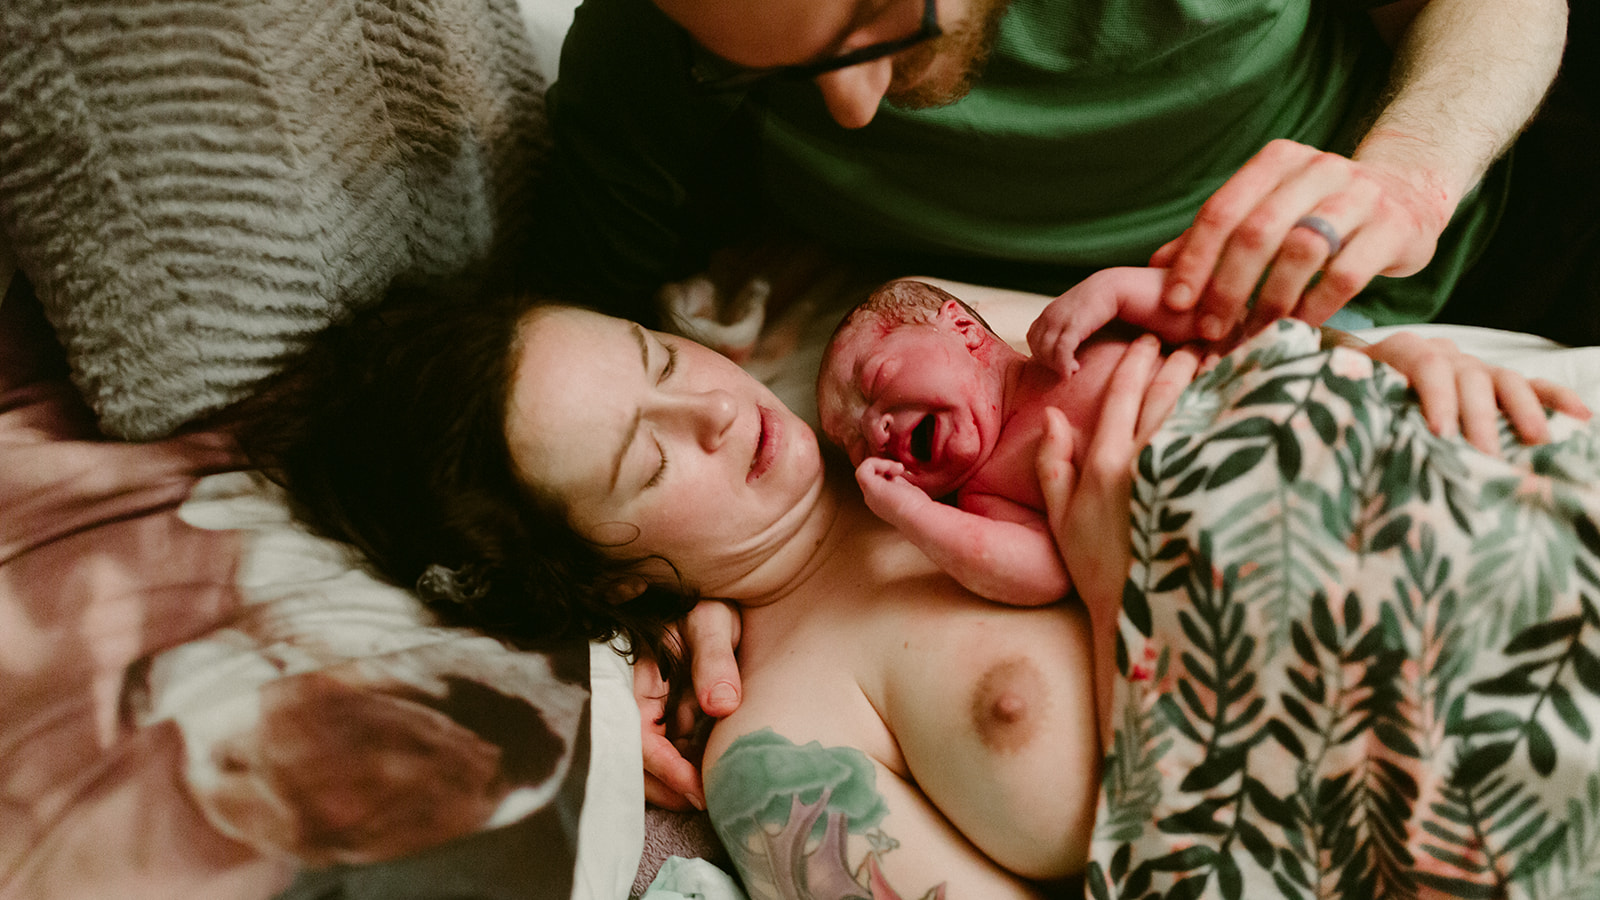 A newborn baby cries on the mother's chest immediately after home birth.